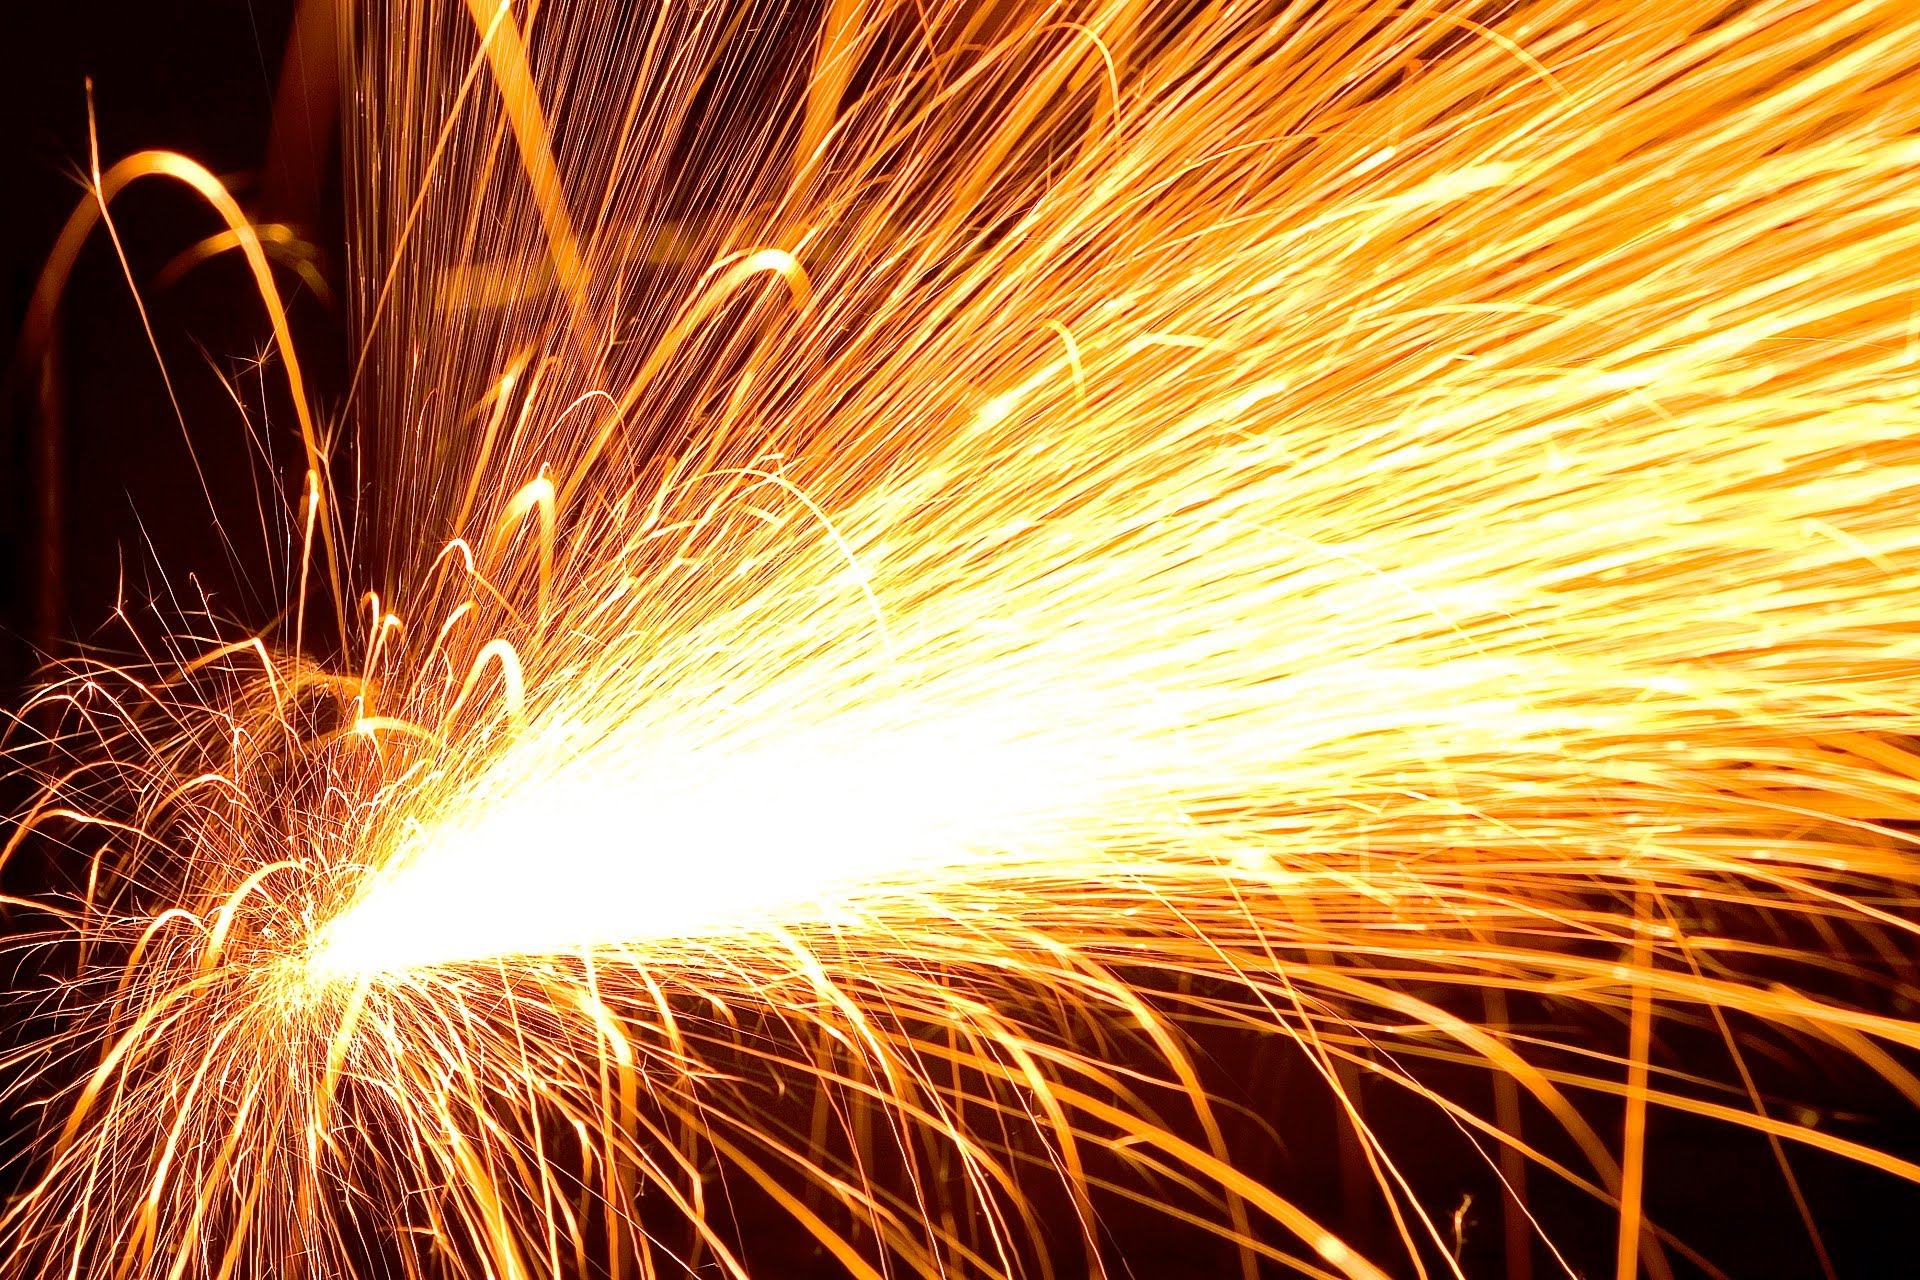 Who Discovered the Spark of Welding?